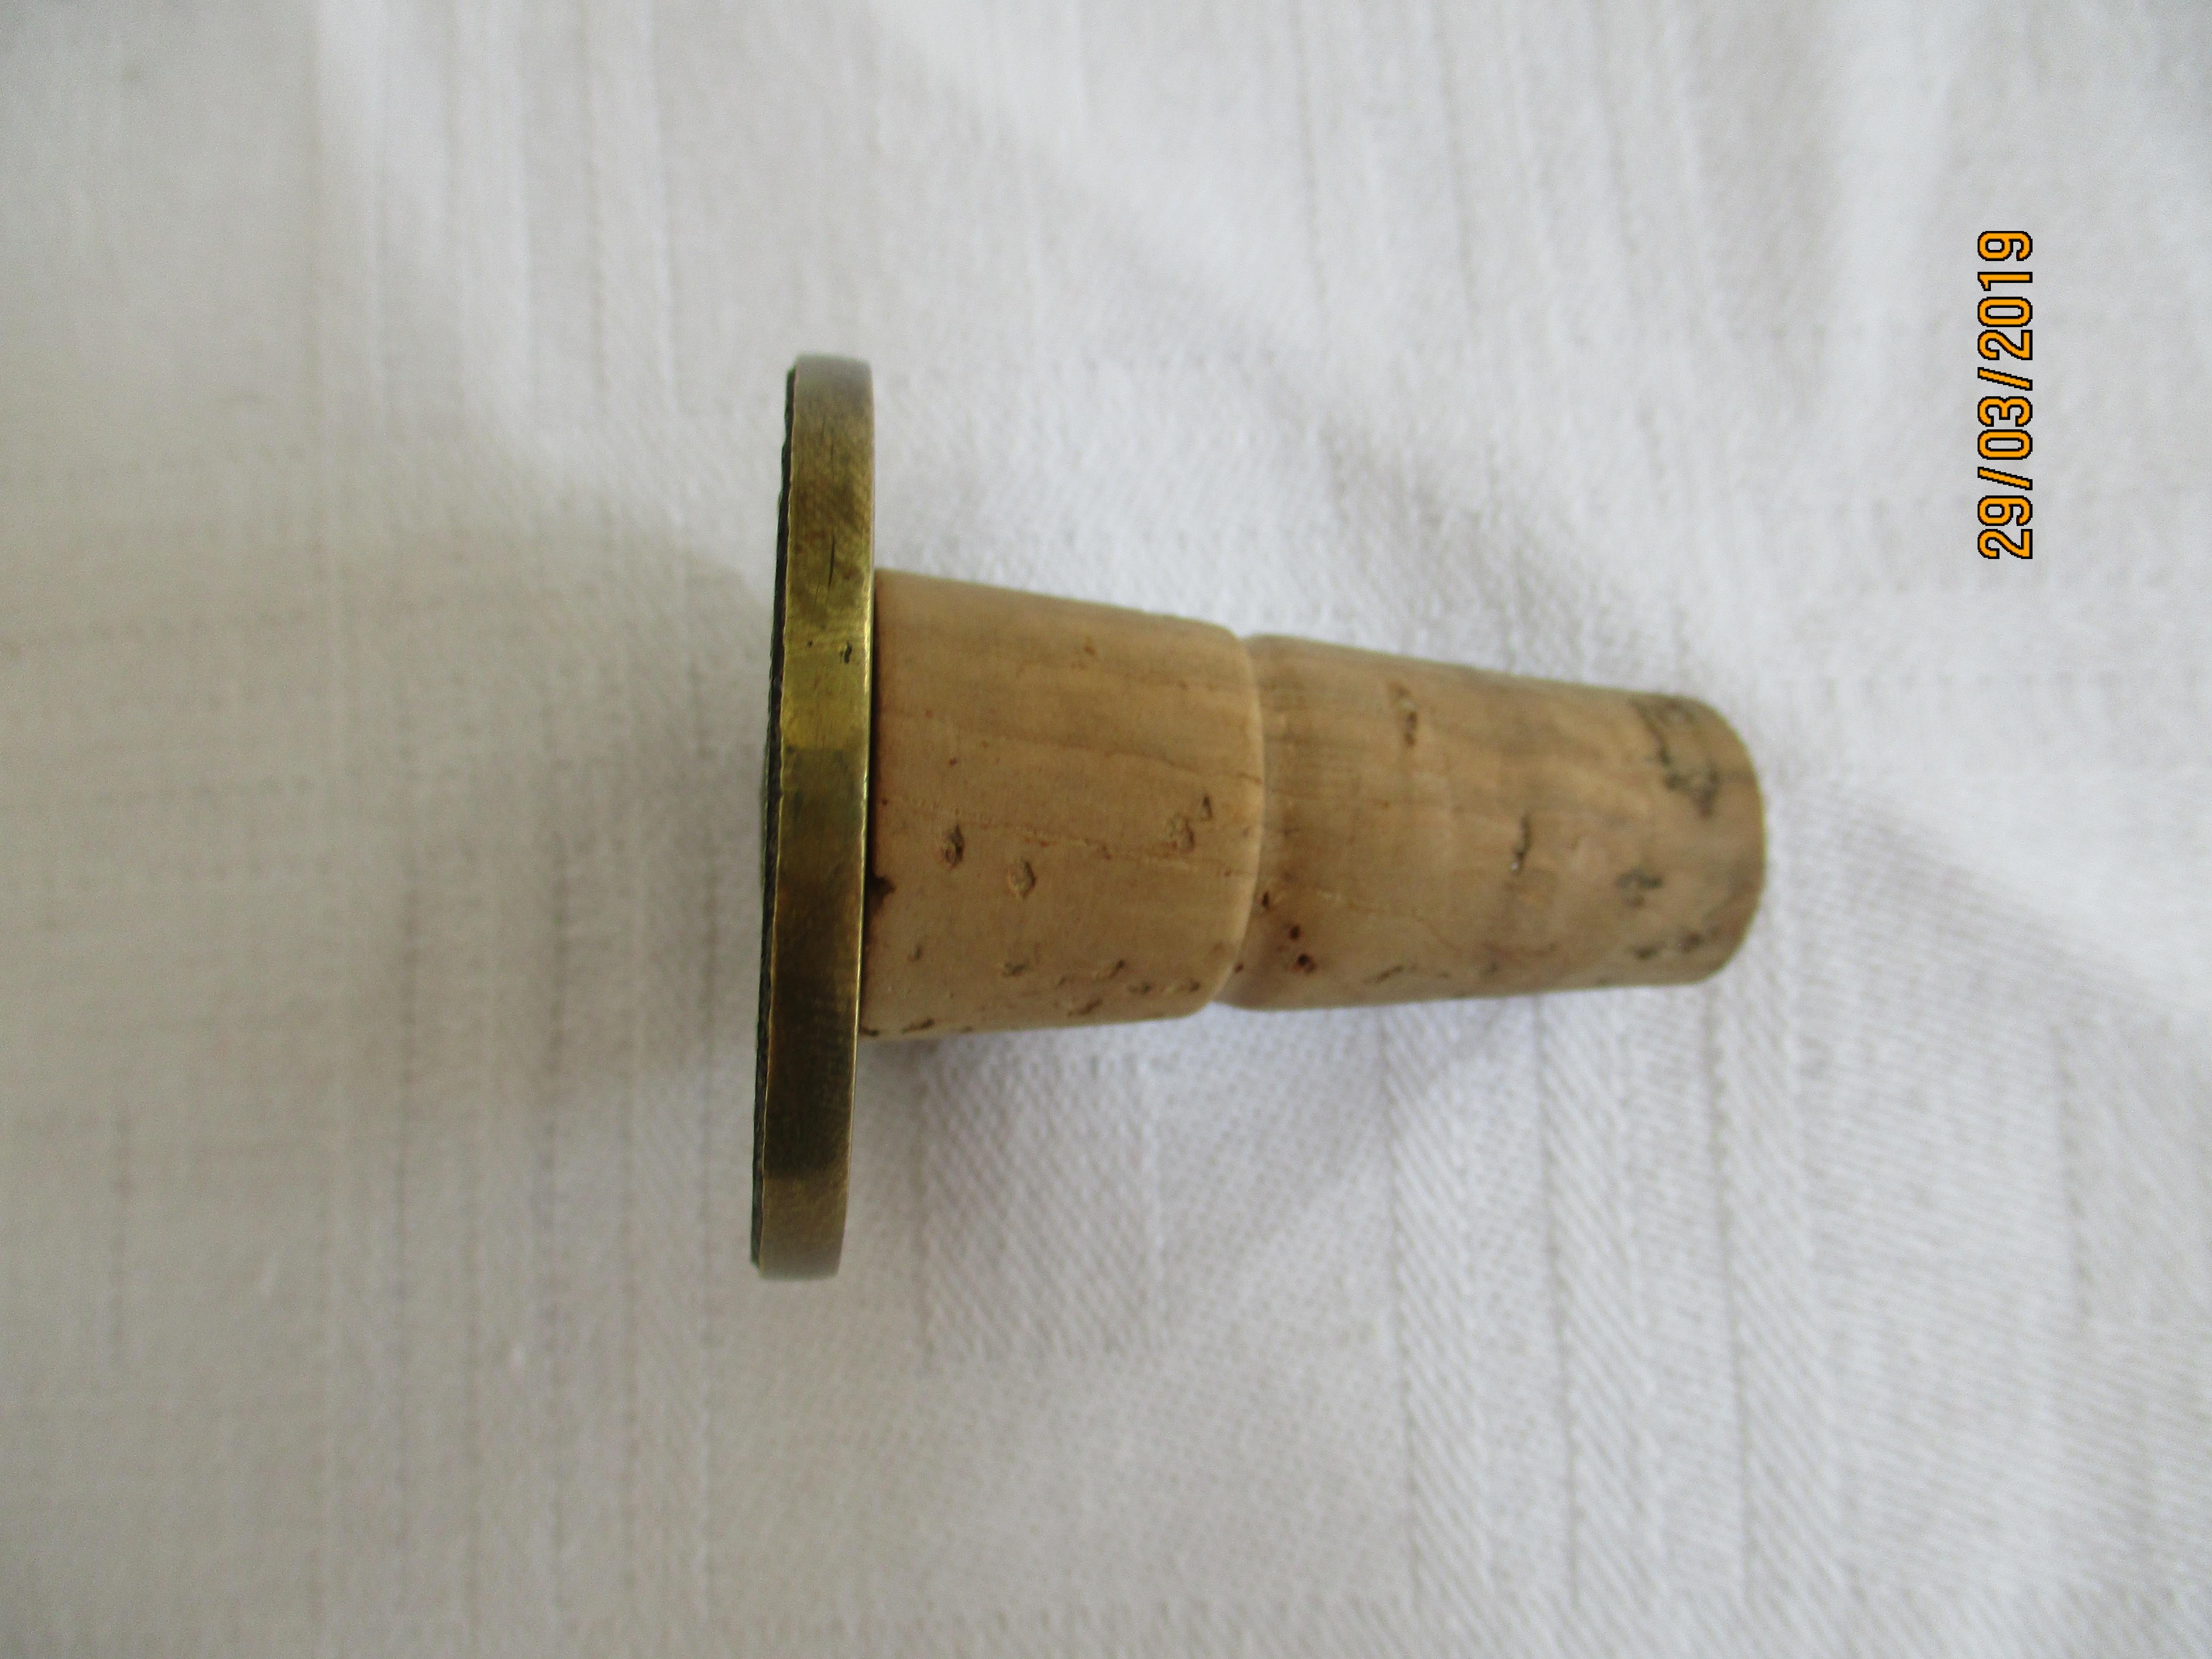 For sale is a beautiful bottle stopper with a historical coin motive. It was crafted from brass and cork and designed by the renowned workshops of Carl Auböck in Austria. It represents the typical style of the 50s and German Bauhaus, where Auböck